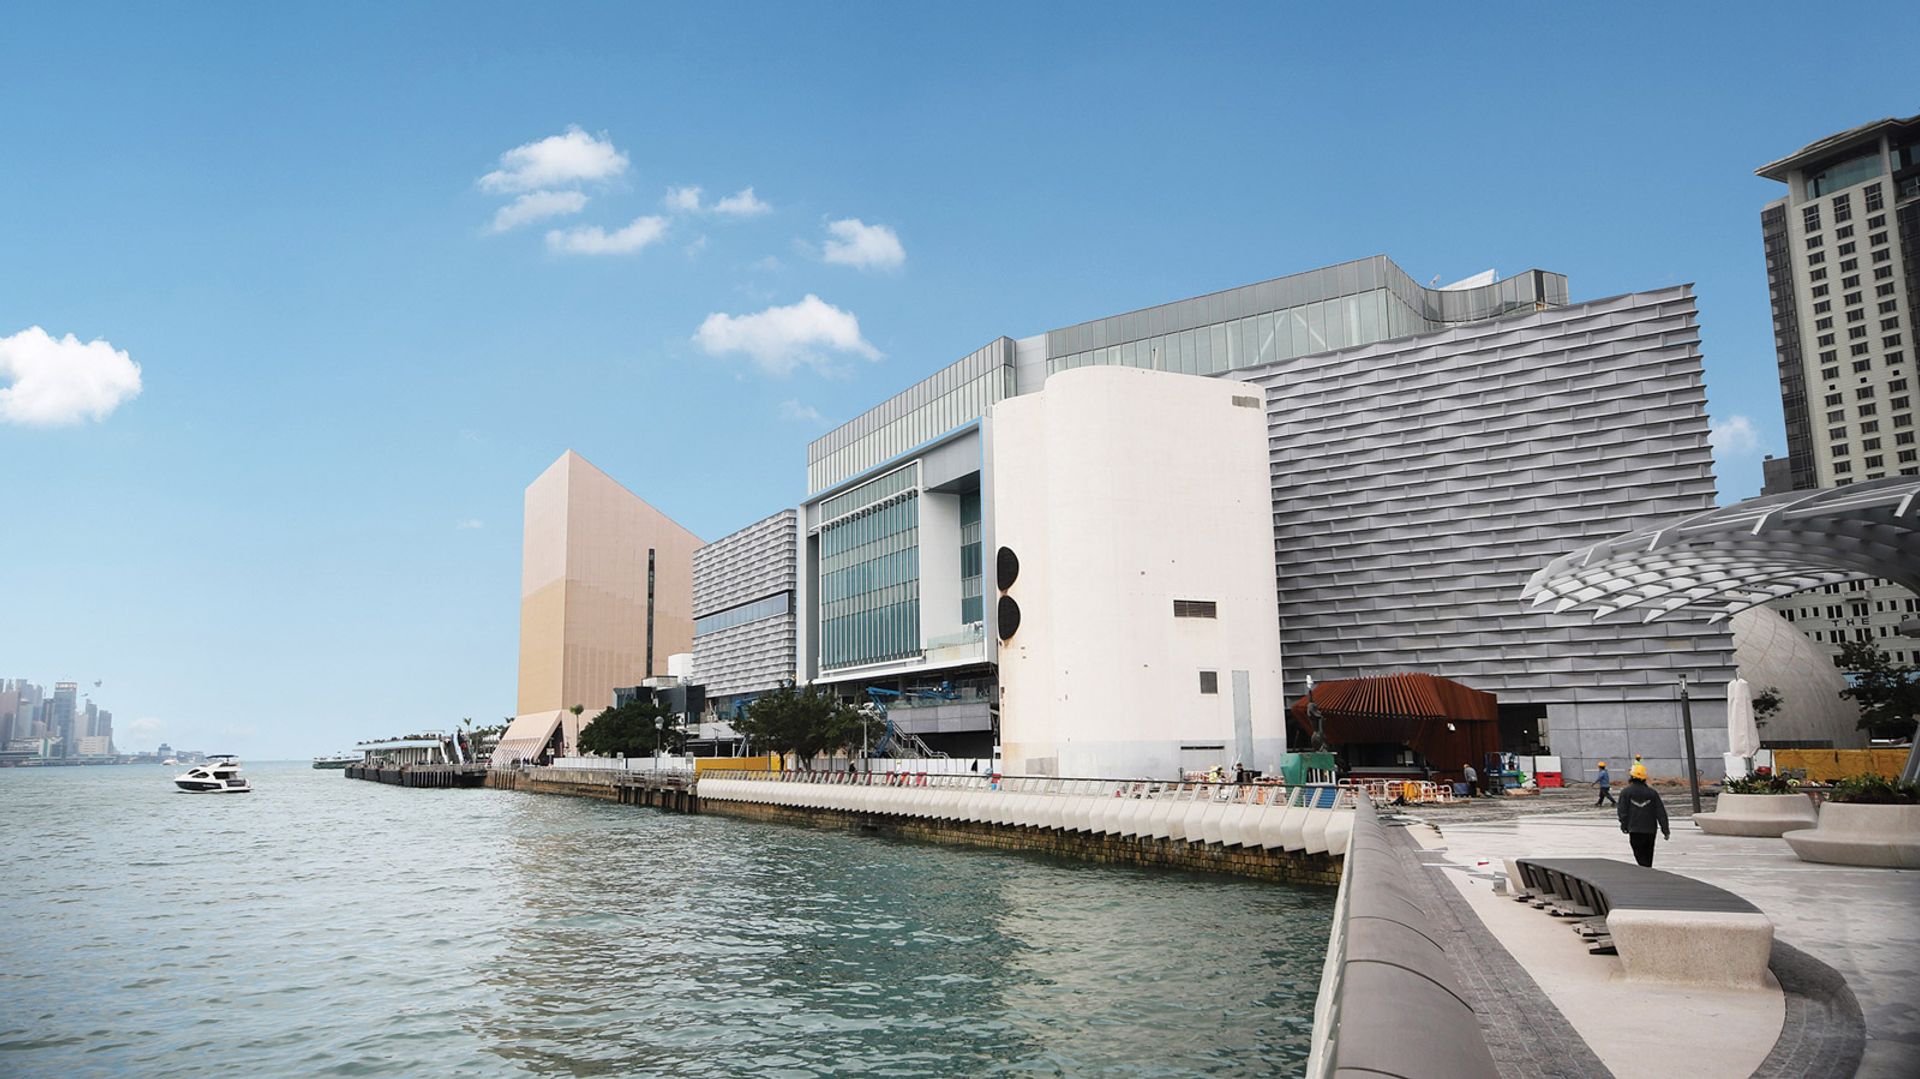 The Hong Kong Museum of Art is reopening on the Kowloon side of Victoria Harbour after a four-year HK$934m ($119m) expansion Courtesy of the Hong Kong Museum of Art